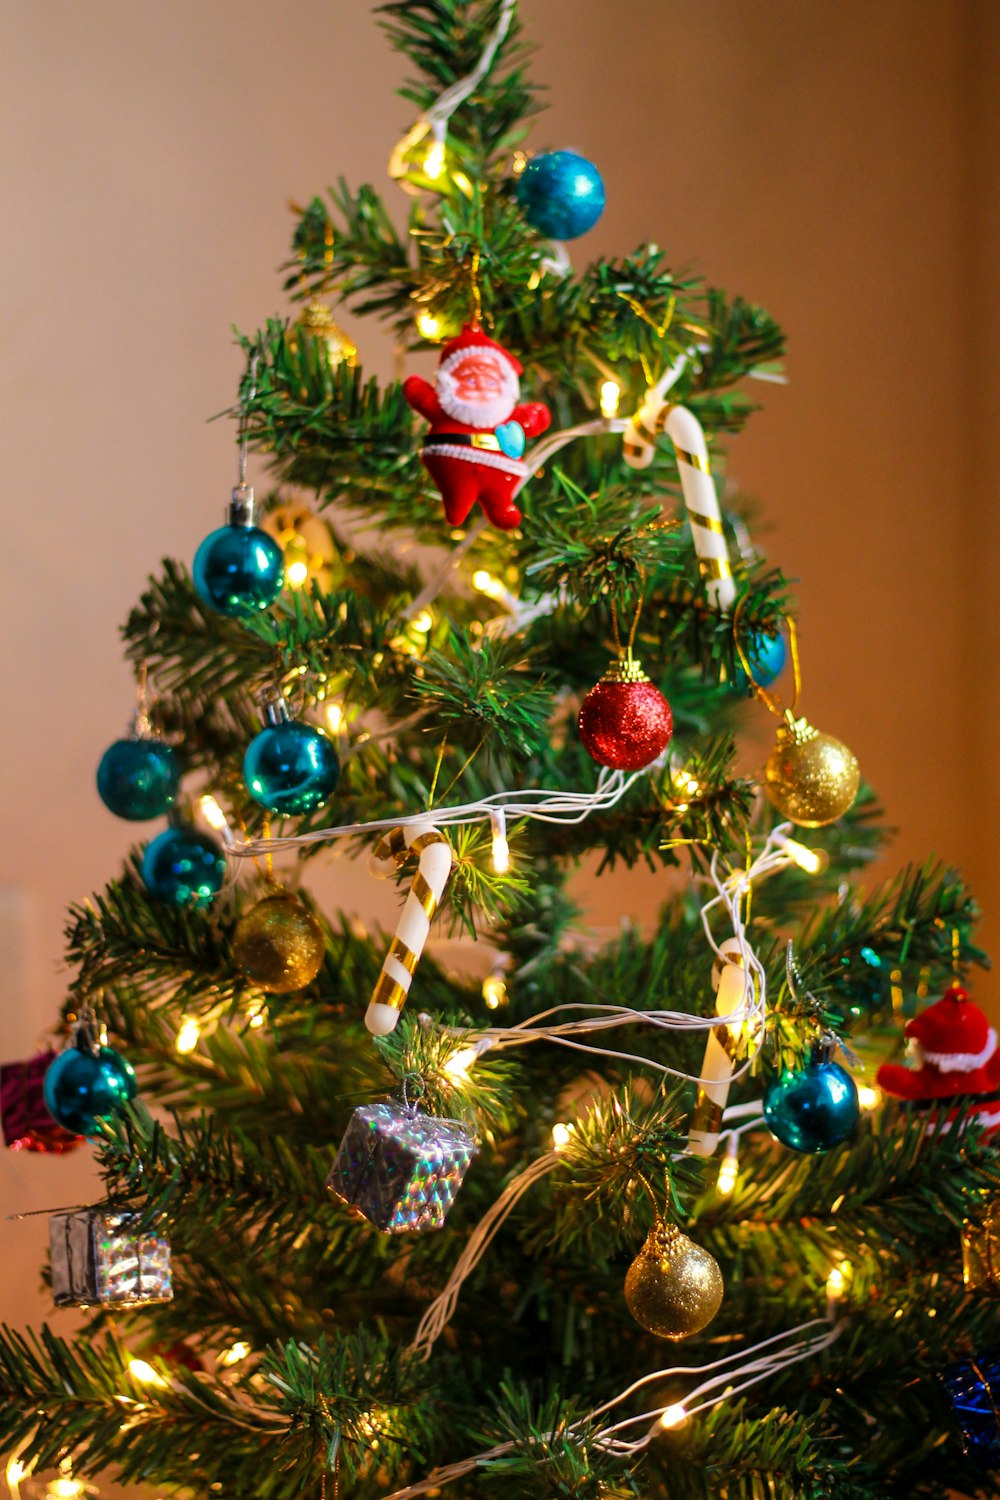 selective focus photography of baubles hanged on Christmas tree